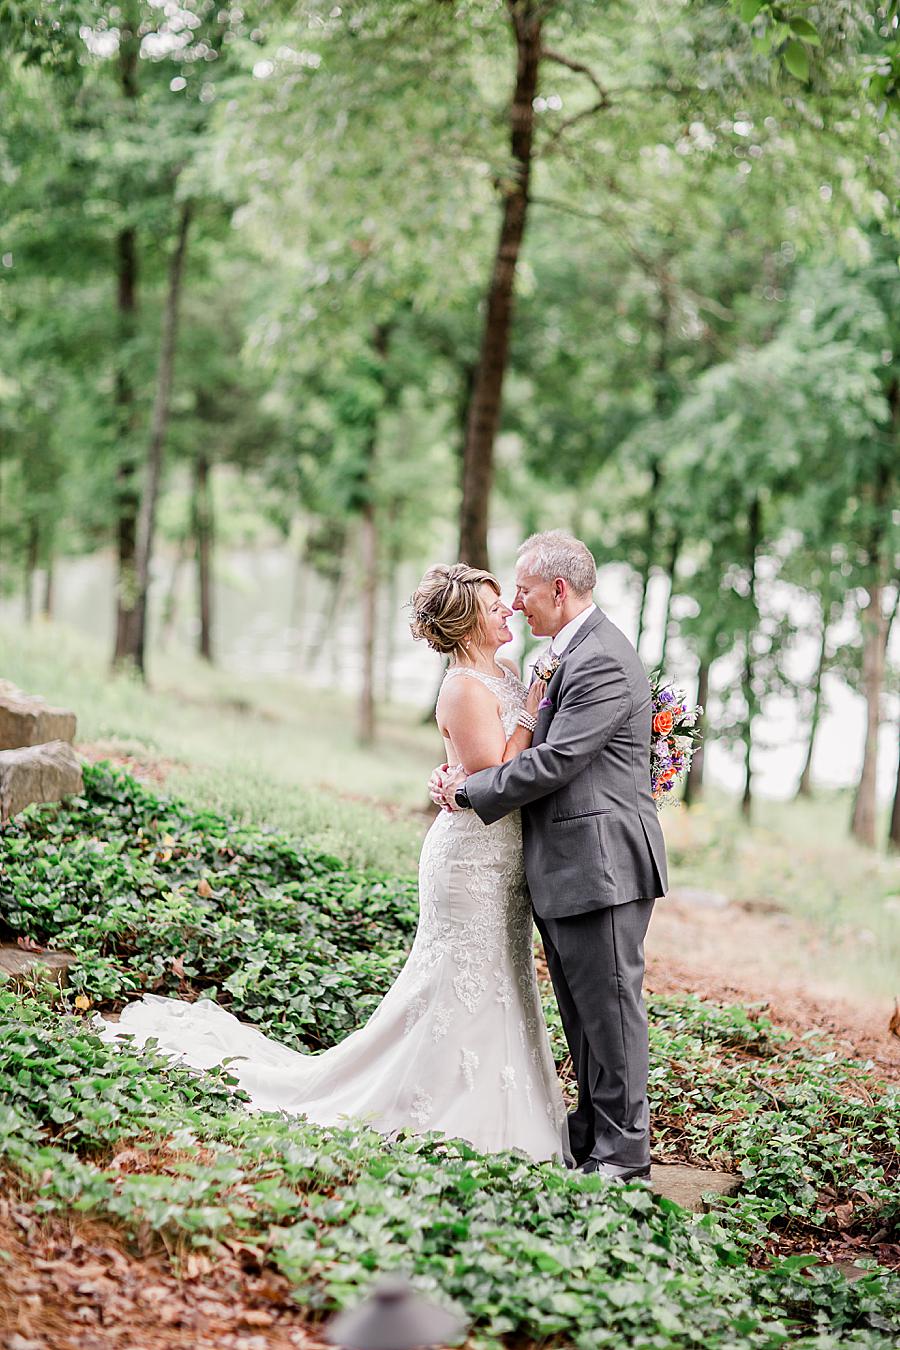 Bride and groom at this intimate WindRiver wedding by Knoxville Wedding Photographer Amanda May Photos.